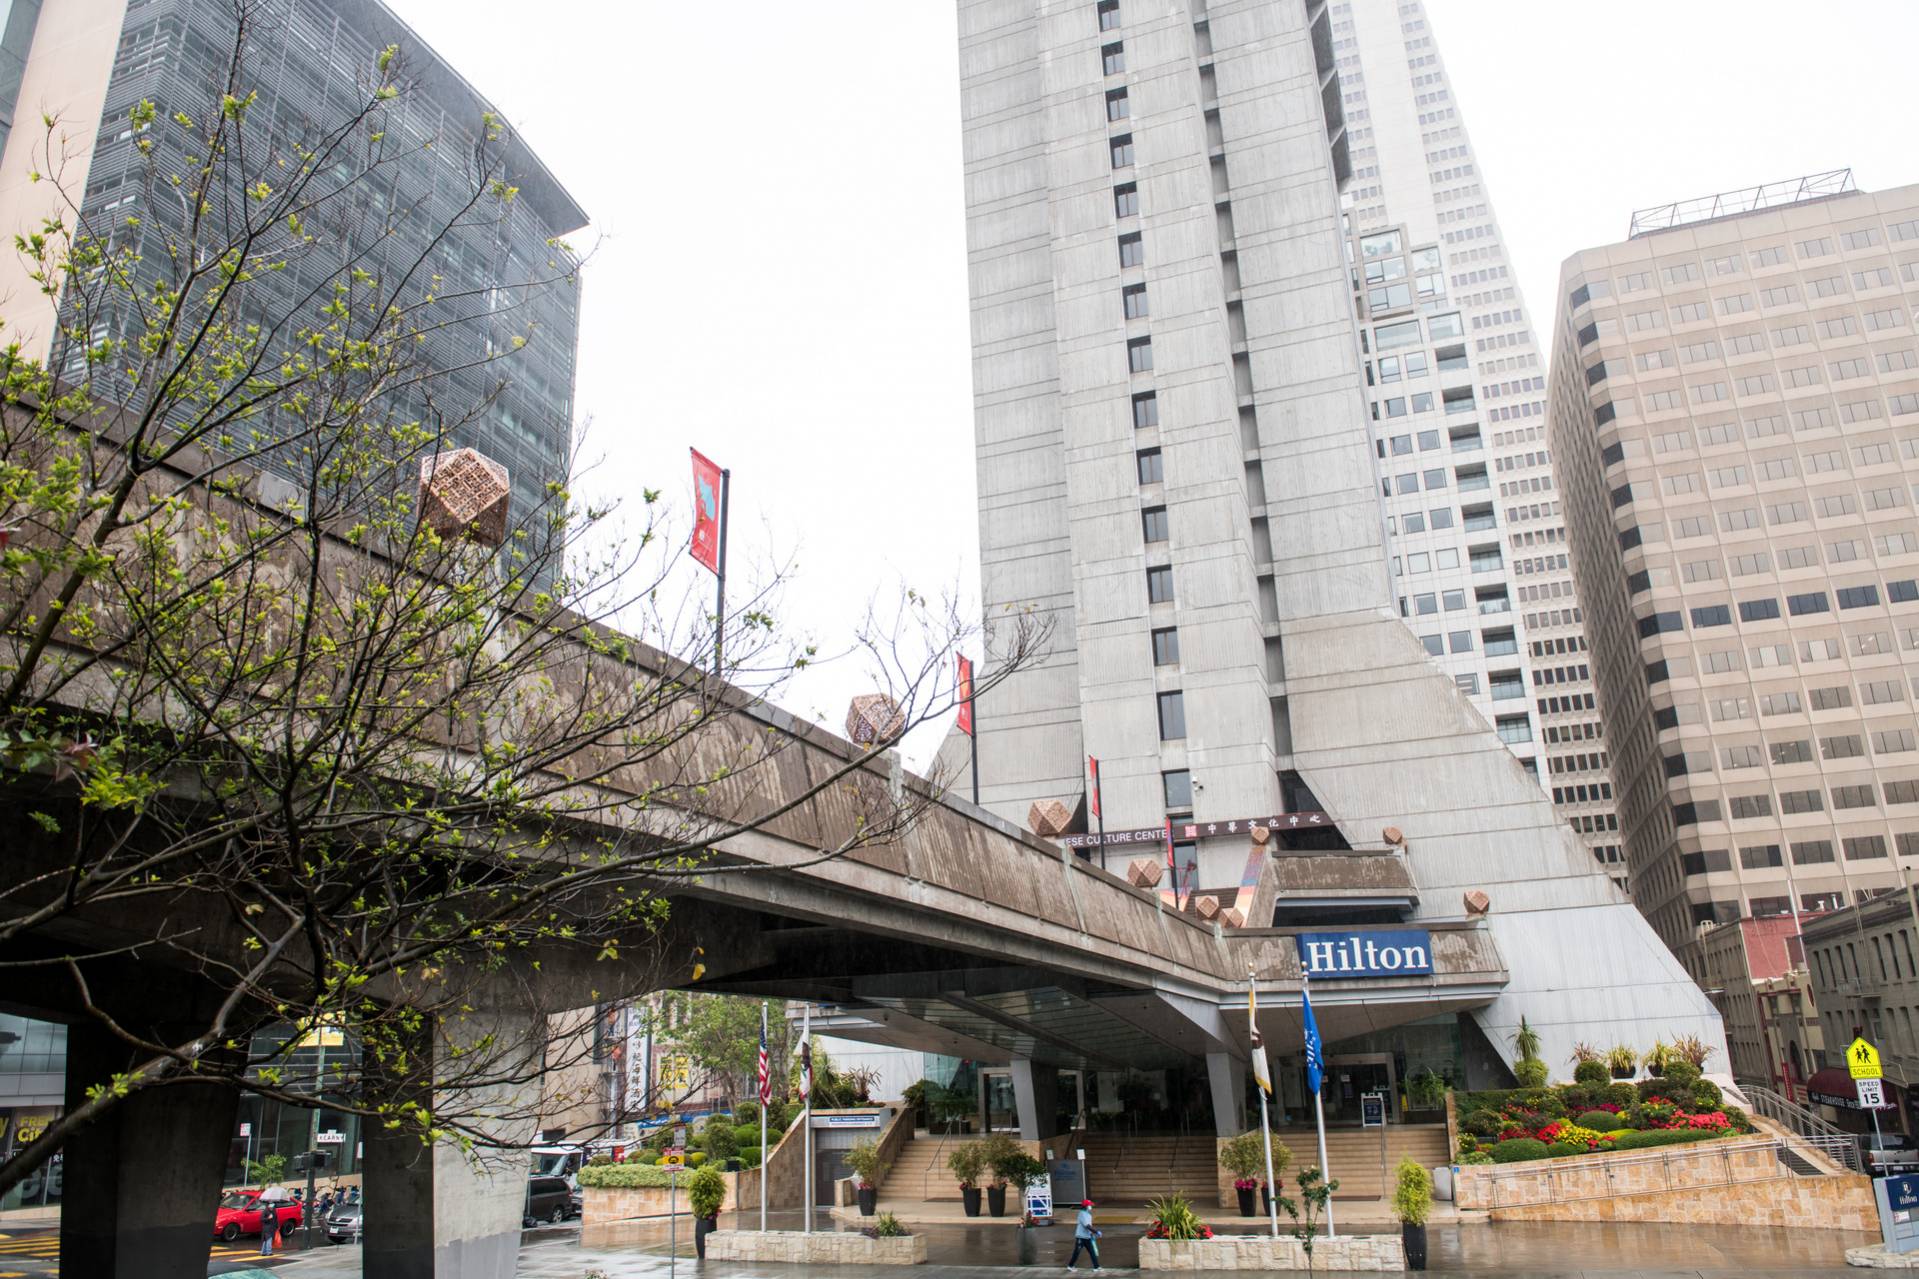 Public Works officials said 'discretionary actions' — in this case keeping or revoking the adjacent Hilton Hotel's permit for its pedestrian footbridge — require an environmental analysis before they can move forward.